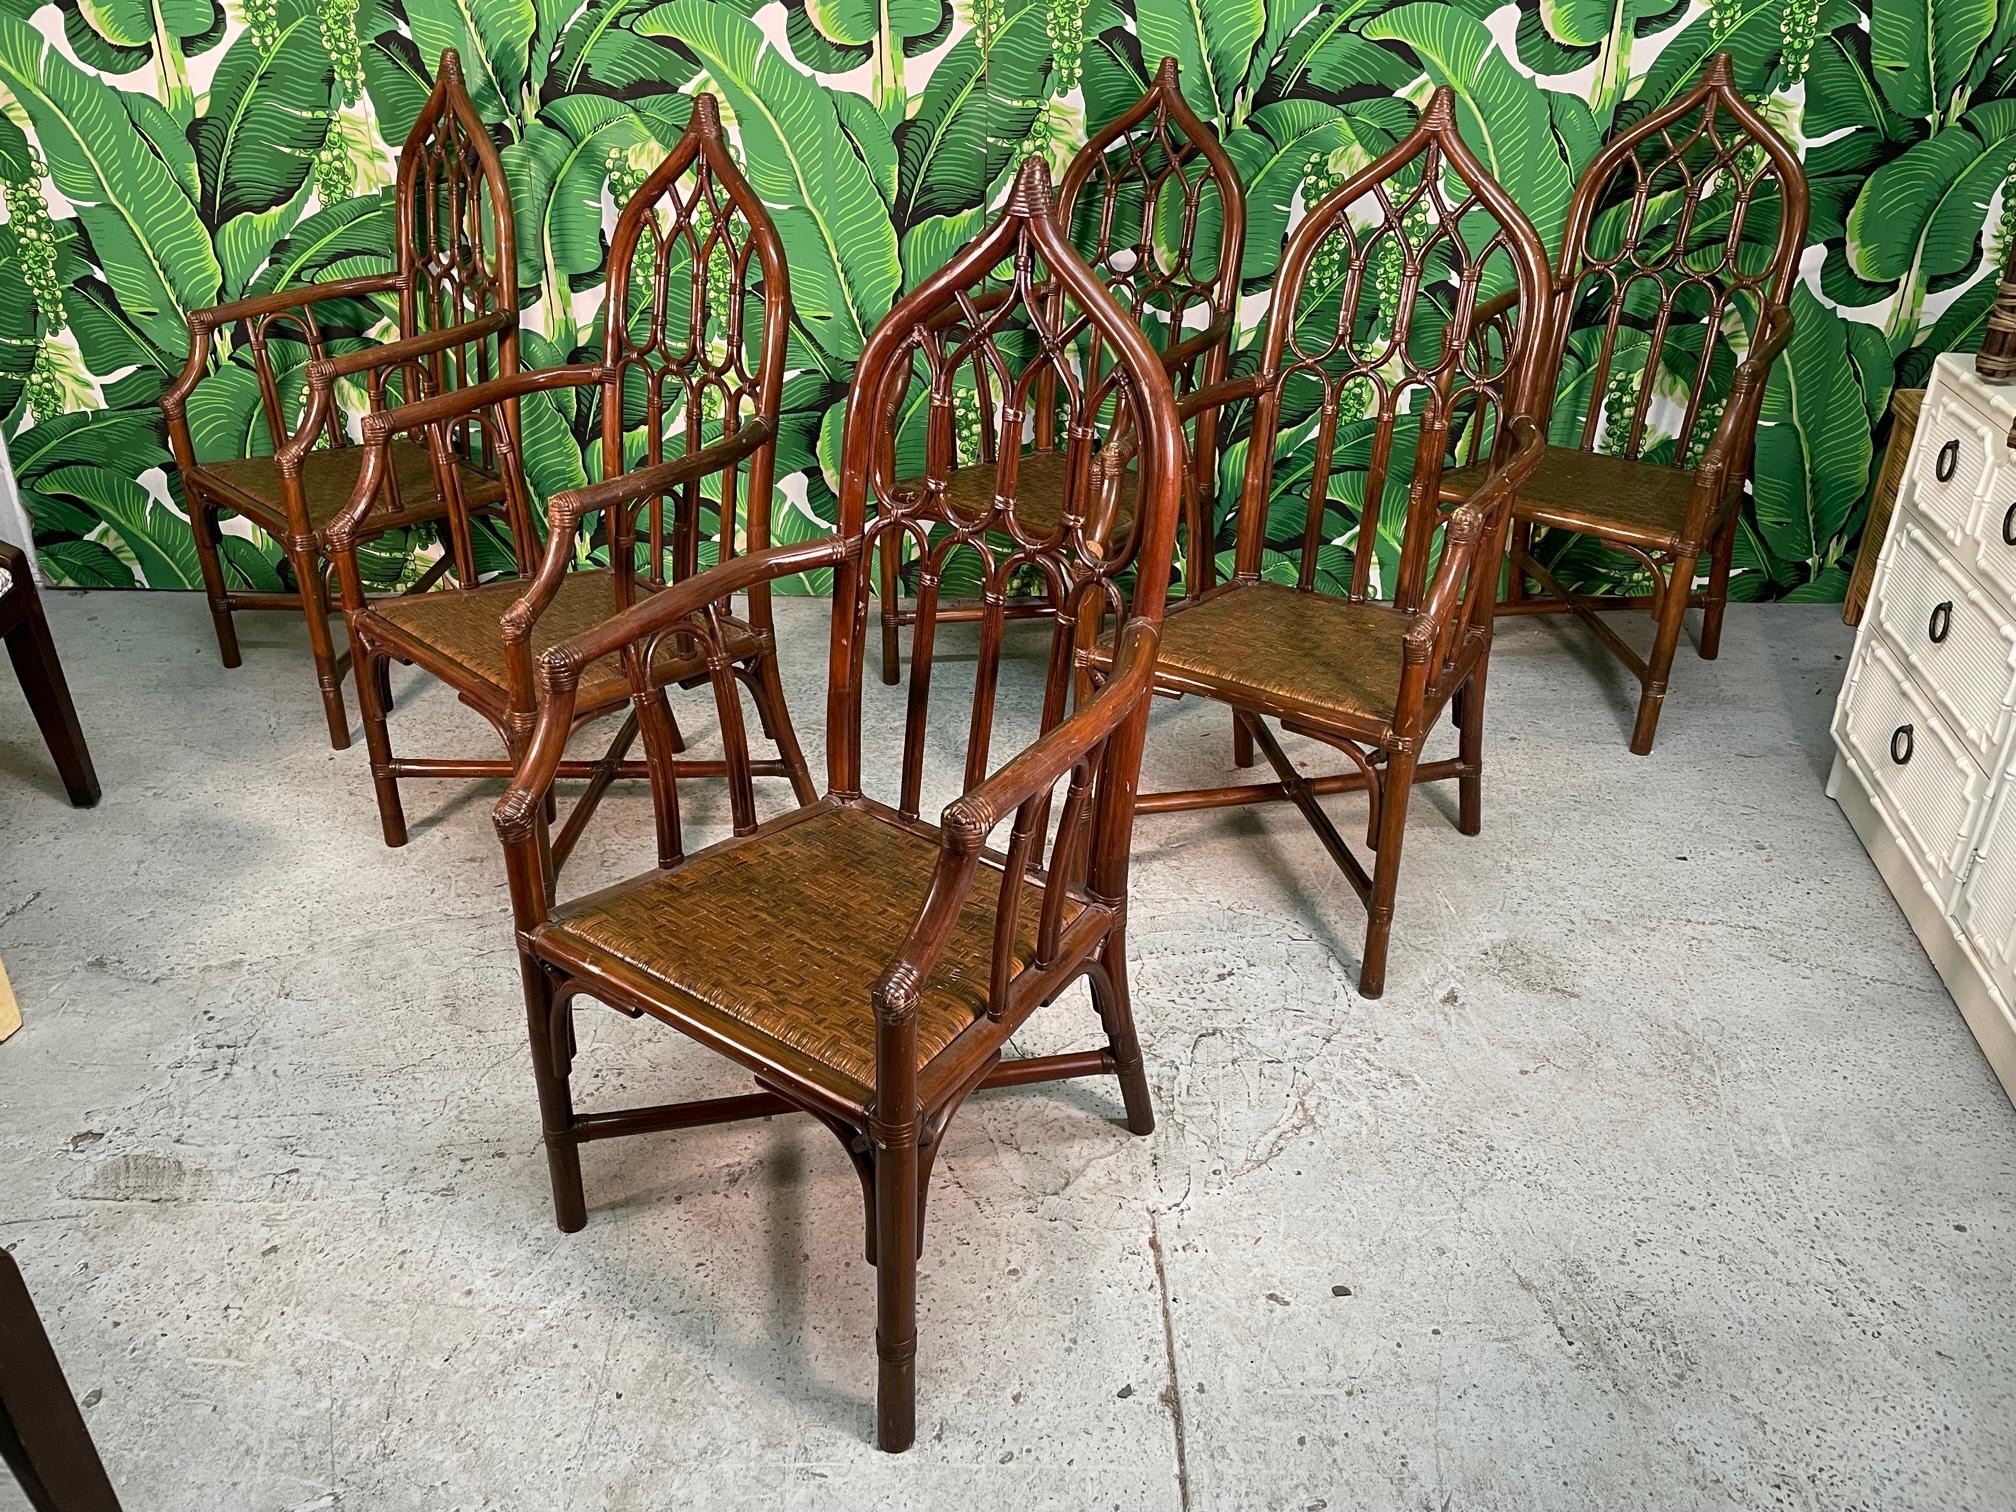 Set of six rattan dining chairs feature a cathedral style design in the manner of McGuire. Woven rattan seats and a deep, rich brown finish. Made by Rattan Originals in Cebu, Philippines. Good vintage condition with imperfections consistent with age